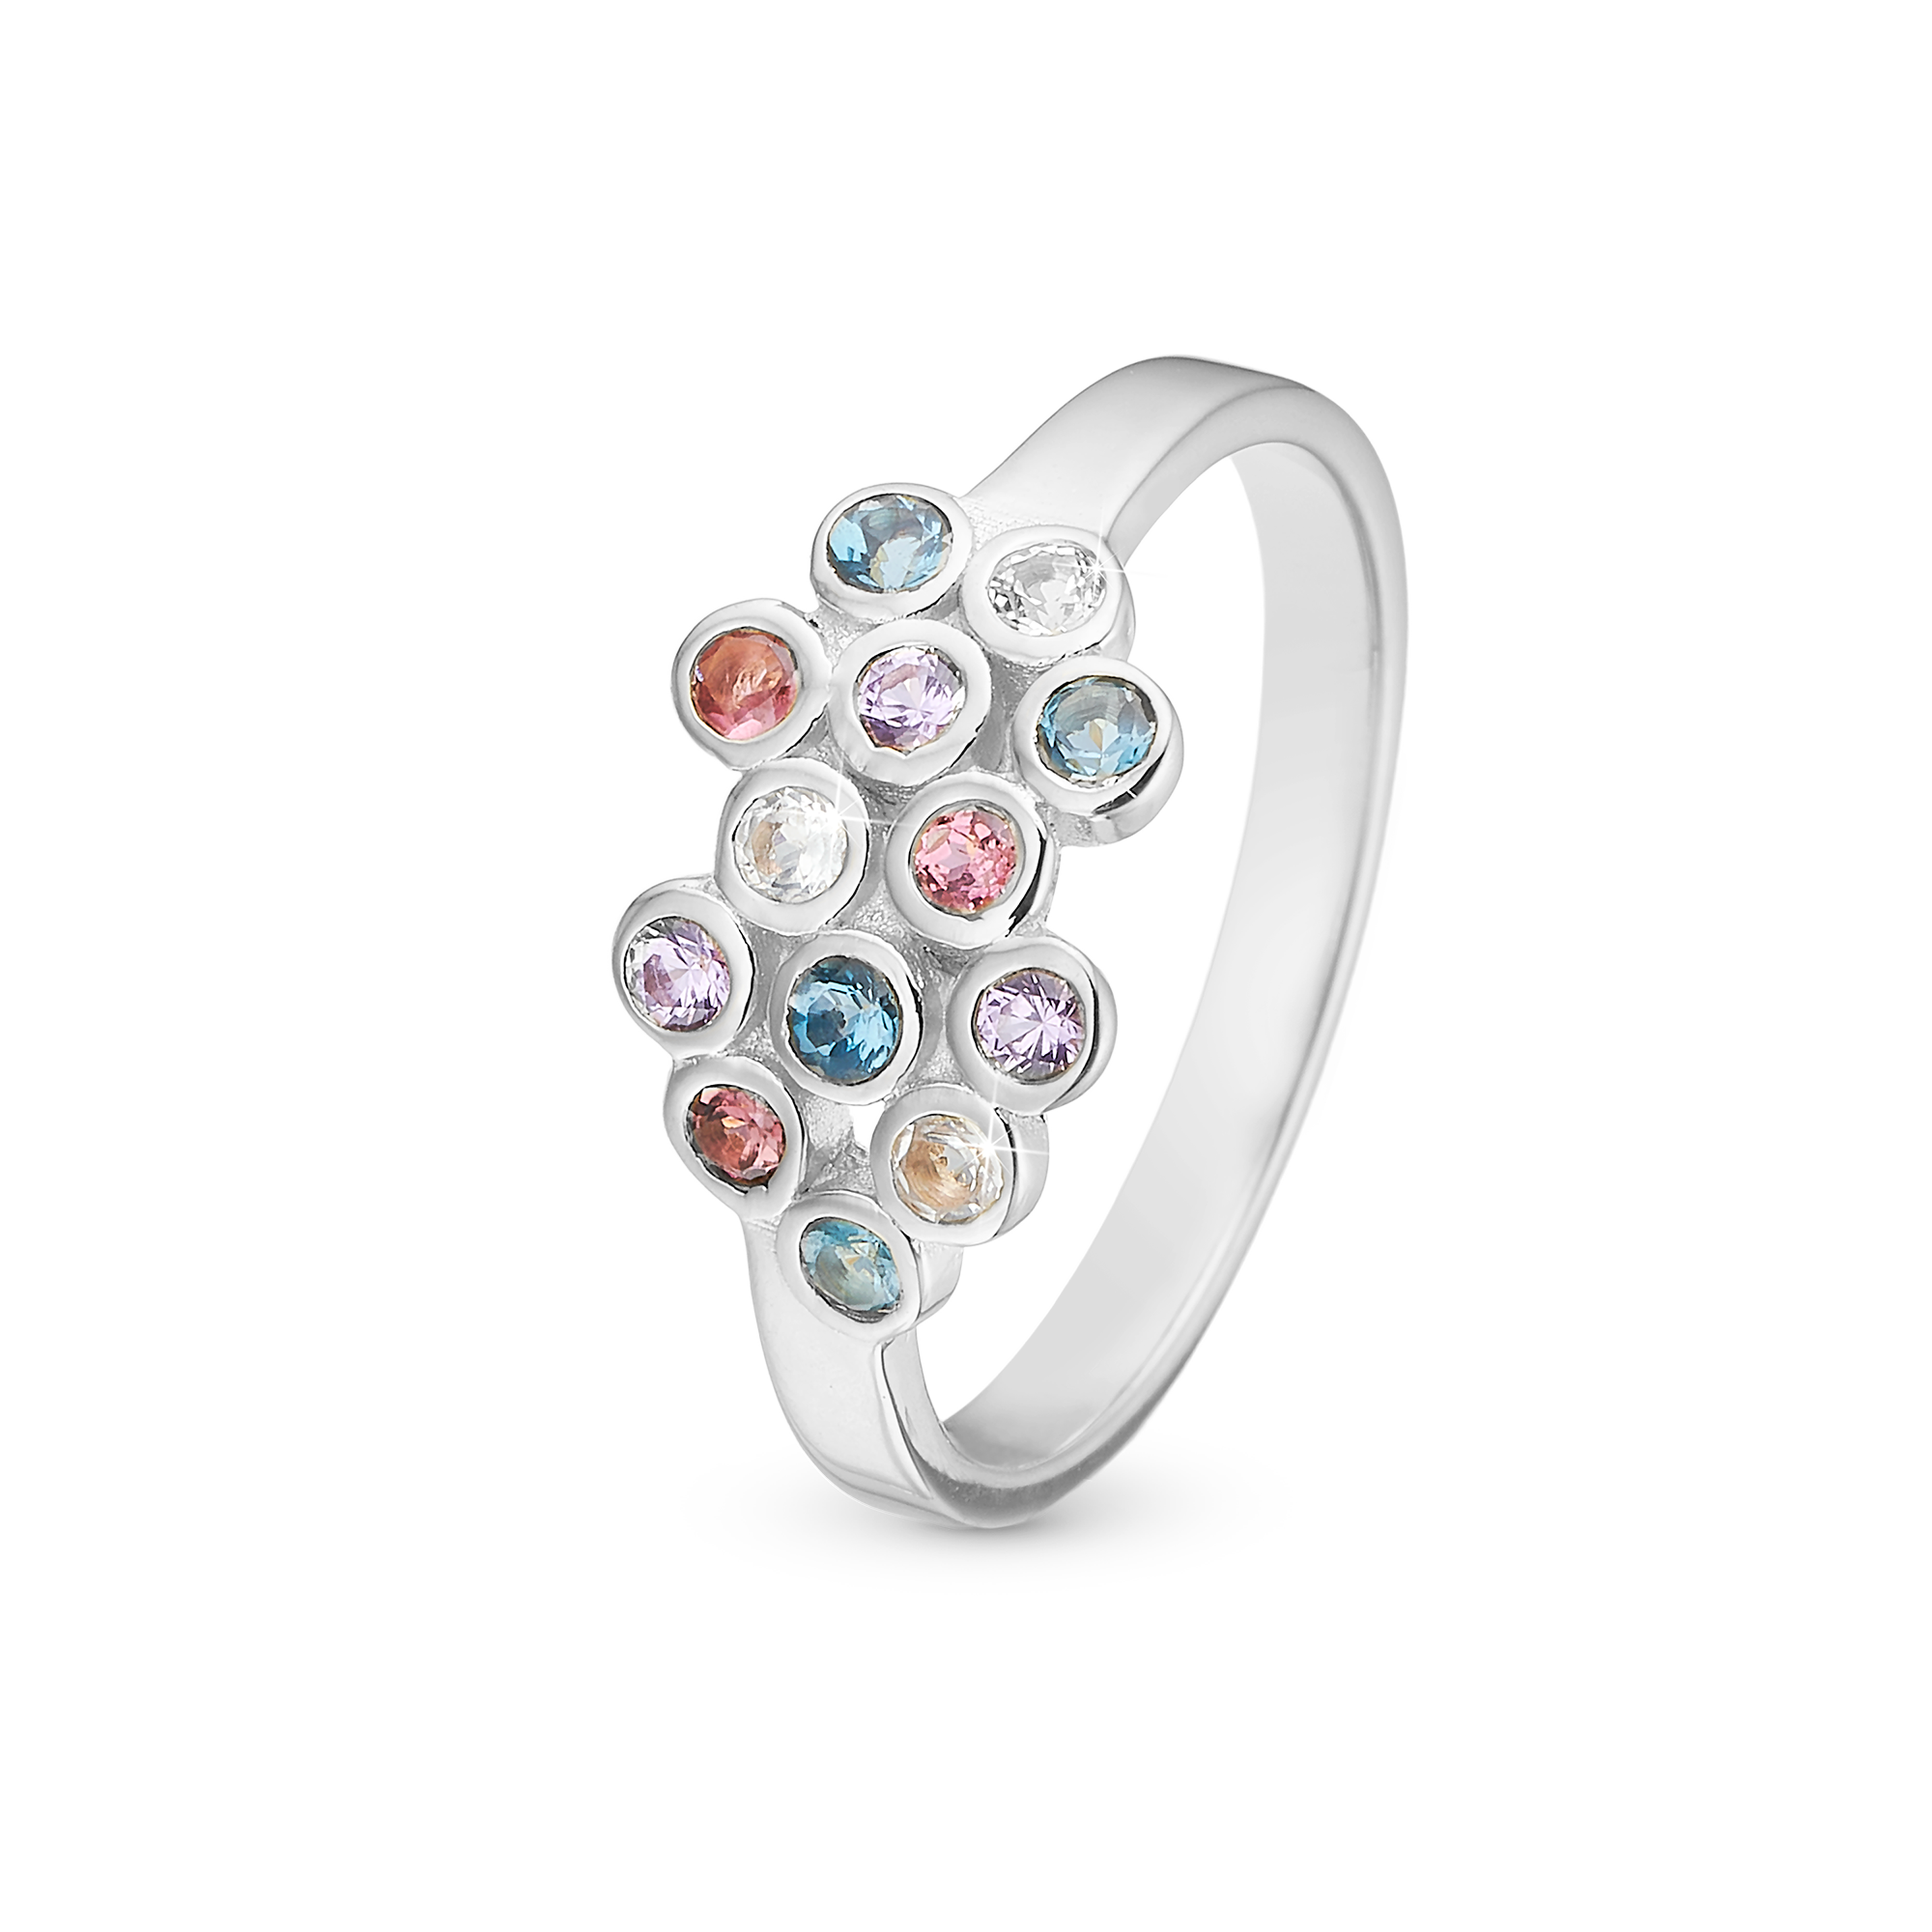 Christina Design London Jewelry & Watches - Colourful Champagne ring 800-4.10.A